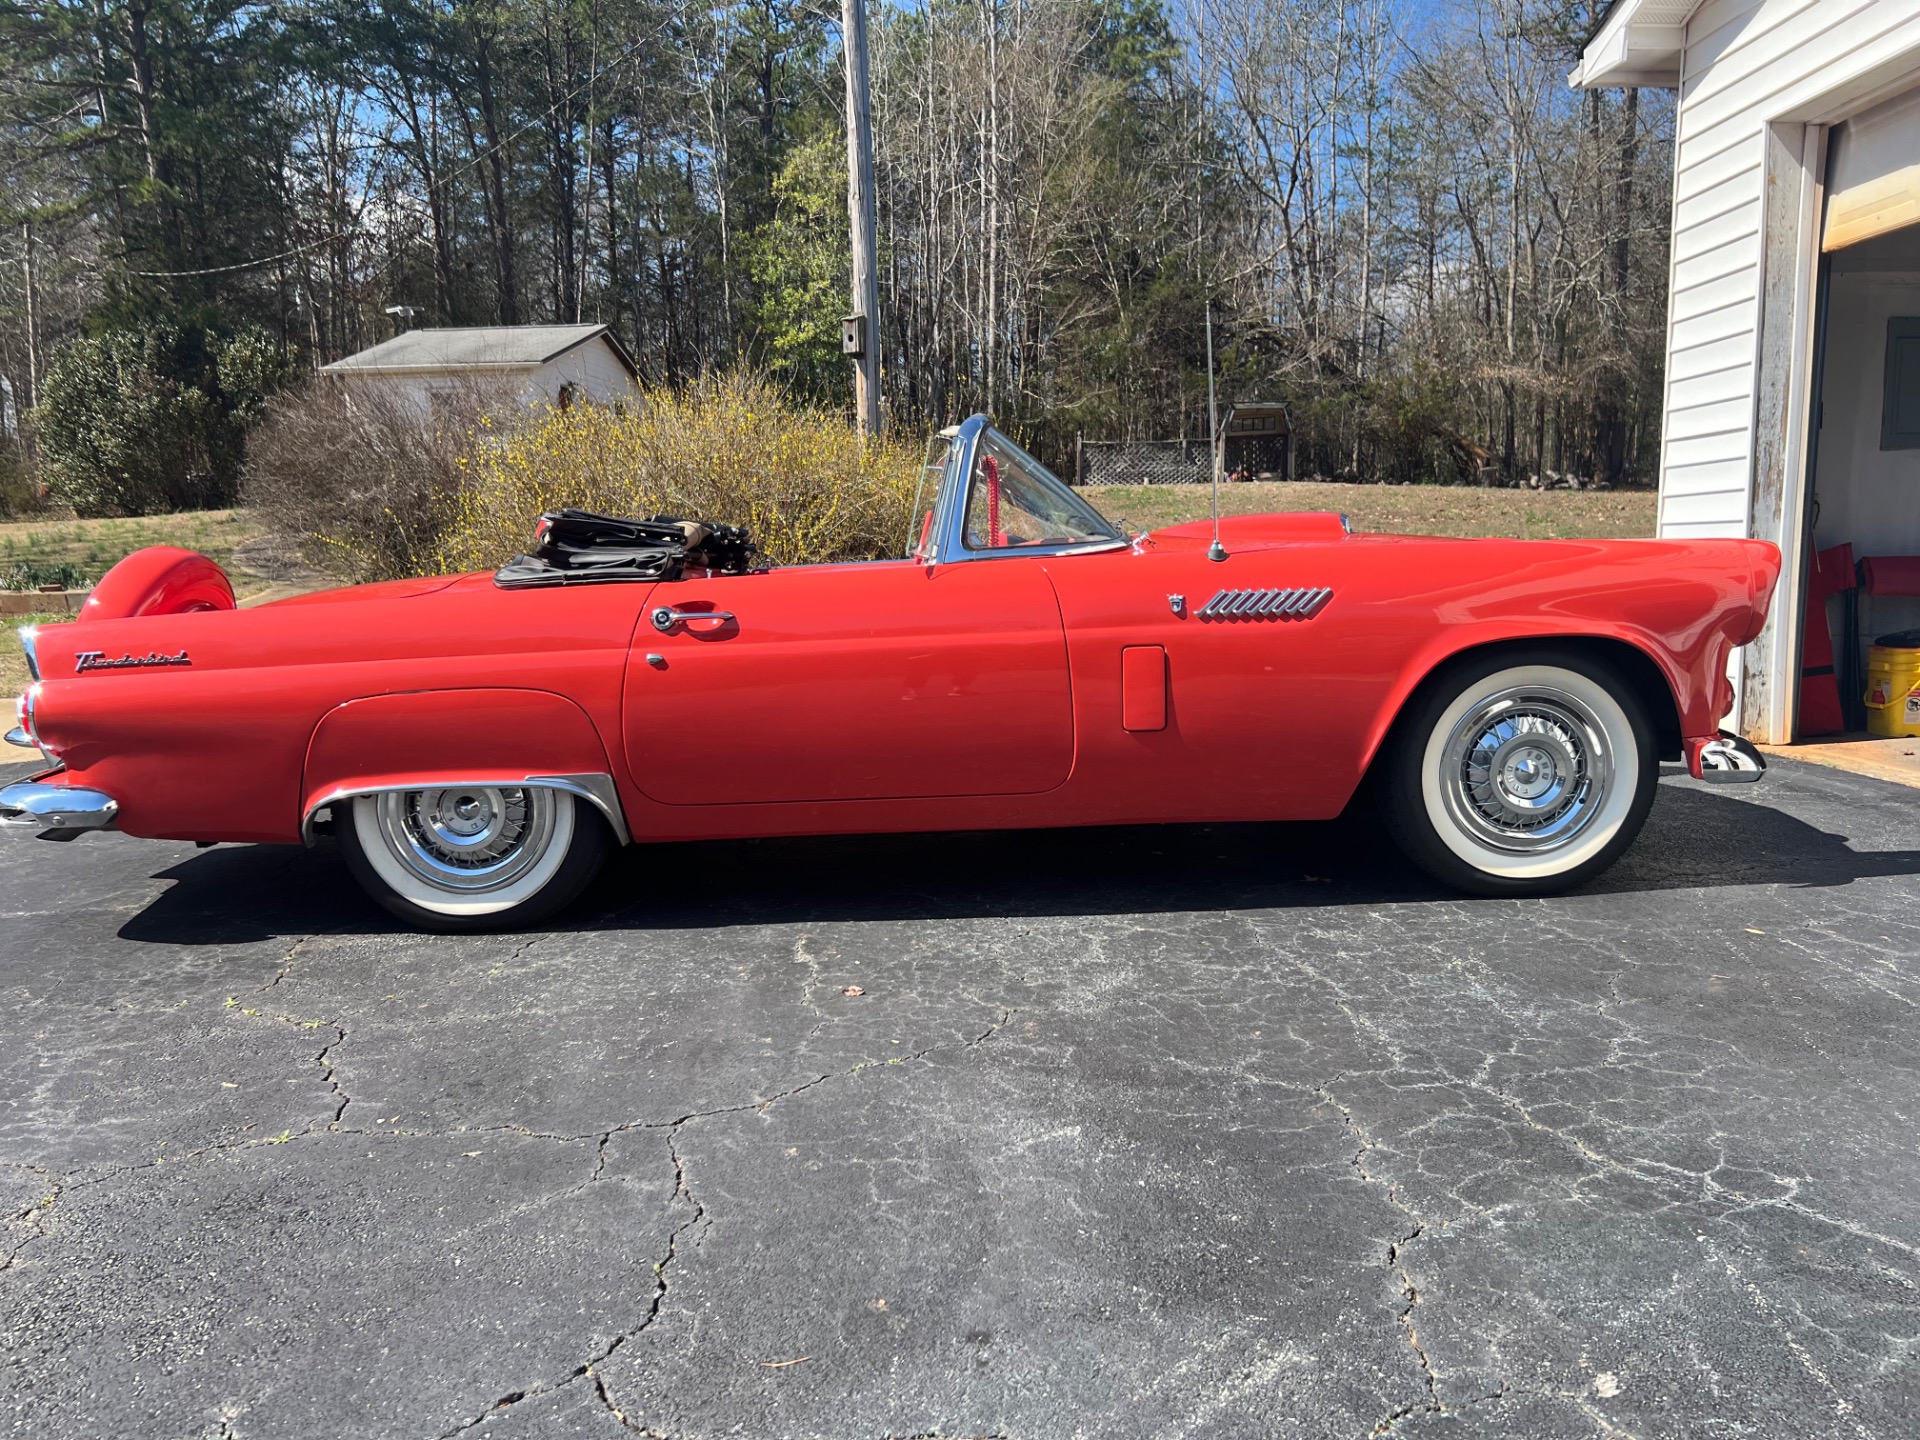 Used 1956 Ford Thunderbird Convertible 266 , For Sale $48000, Call Us: (704) 996-3735